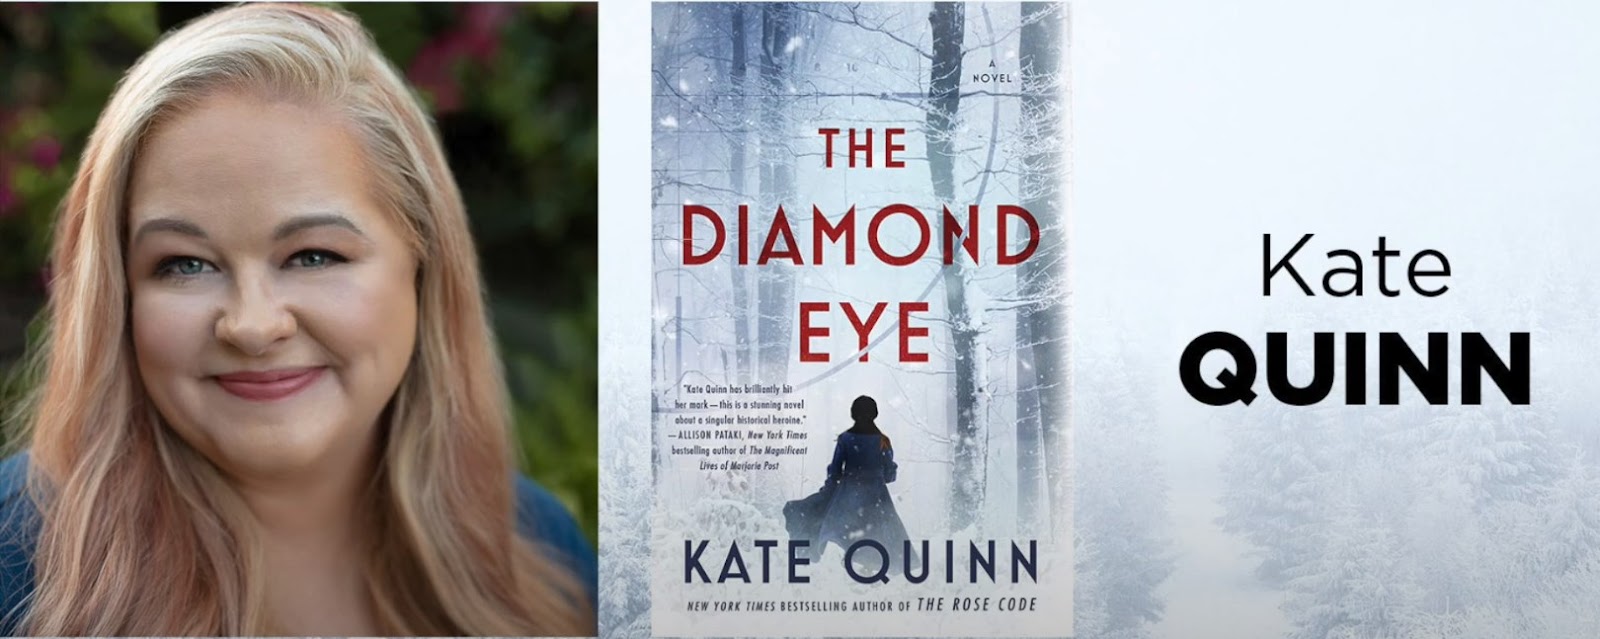 Kate Quinn and her “The Diamon Eye” book (cover)